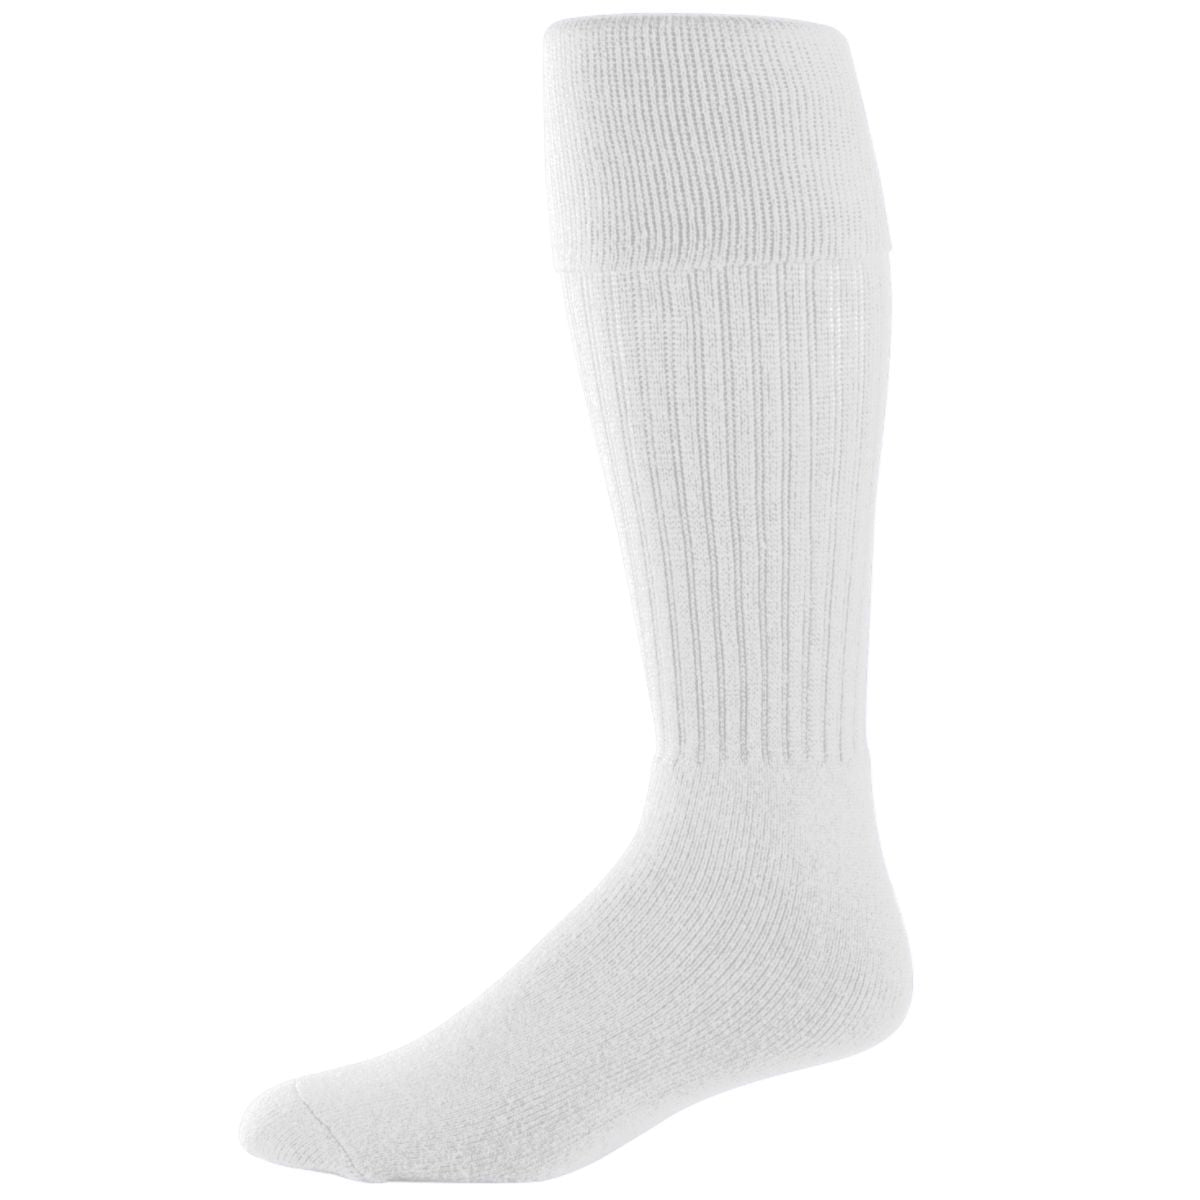 Augusta Sportswear Soccer Sock in White  -Part of the Accessories, Augusta-Products, Accessories-Socks, Soccer, All-Sports-1 product lines at KanaleyCreations.com